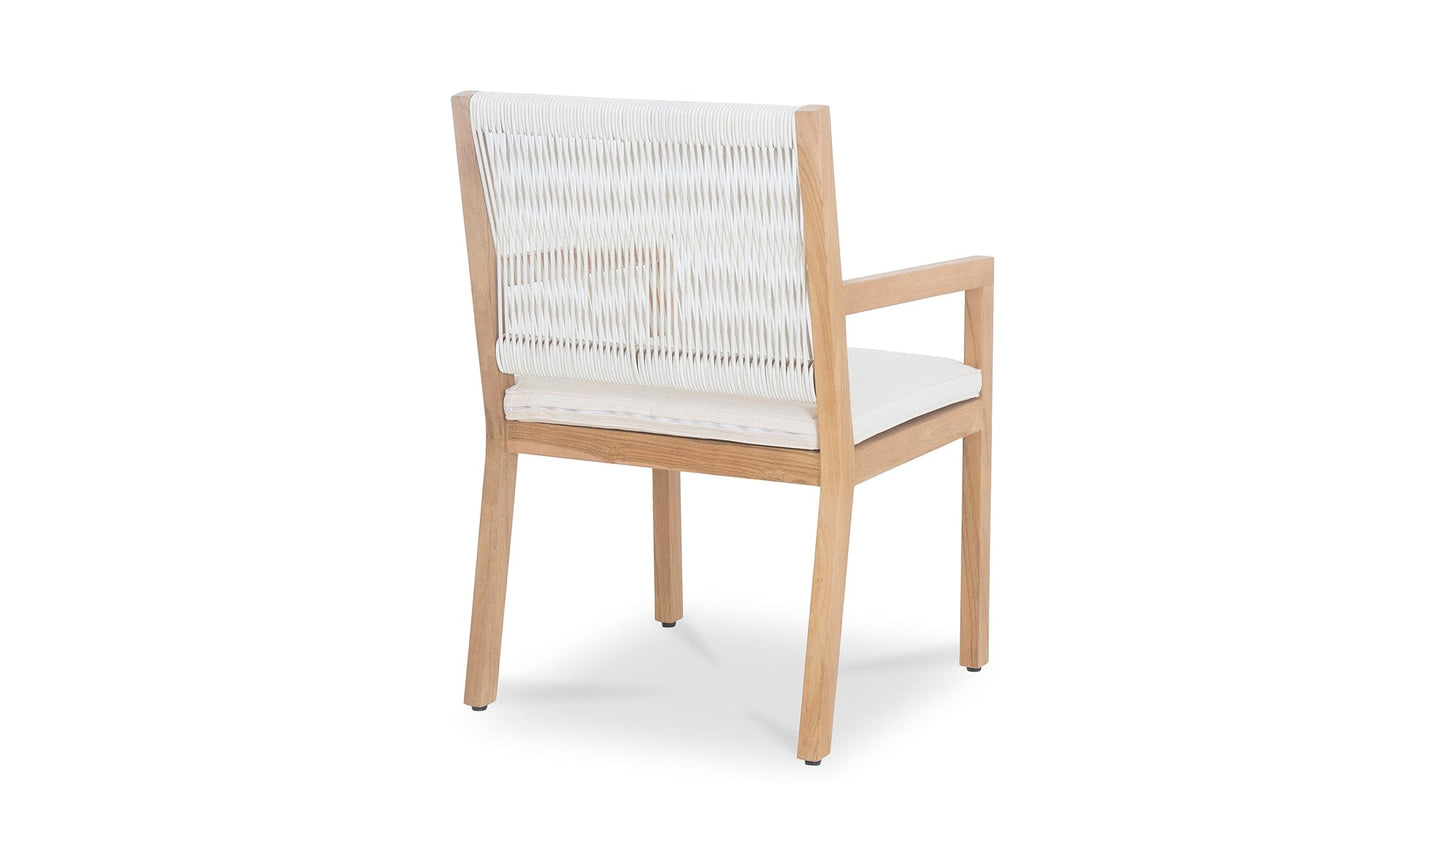 Moe's LUCE OUTDOOR DINING CHAIR